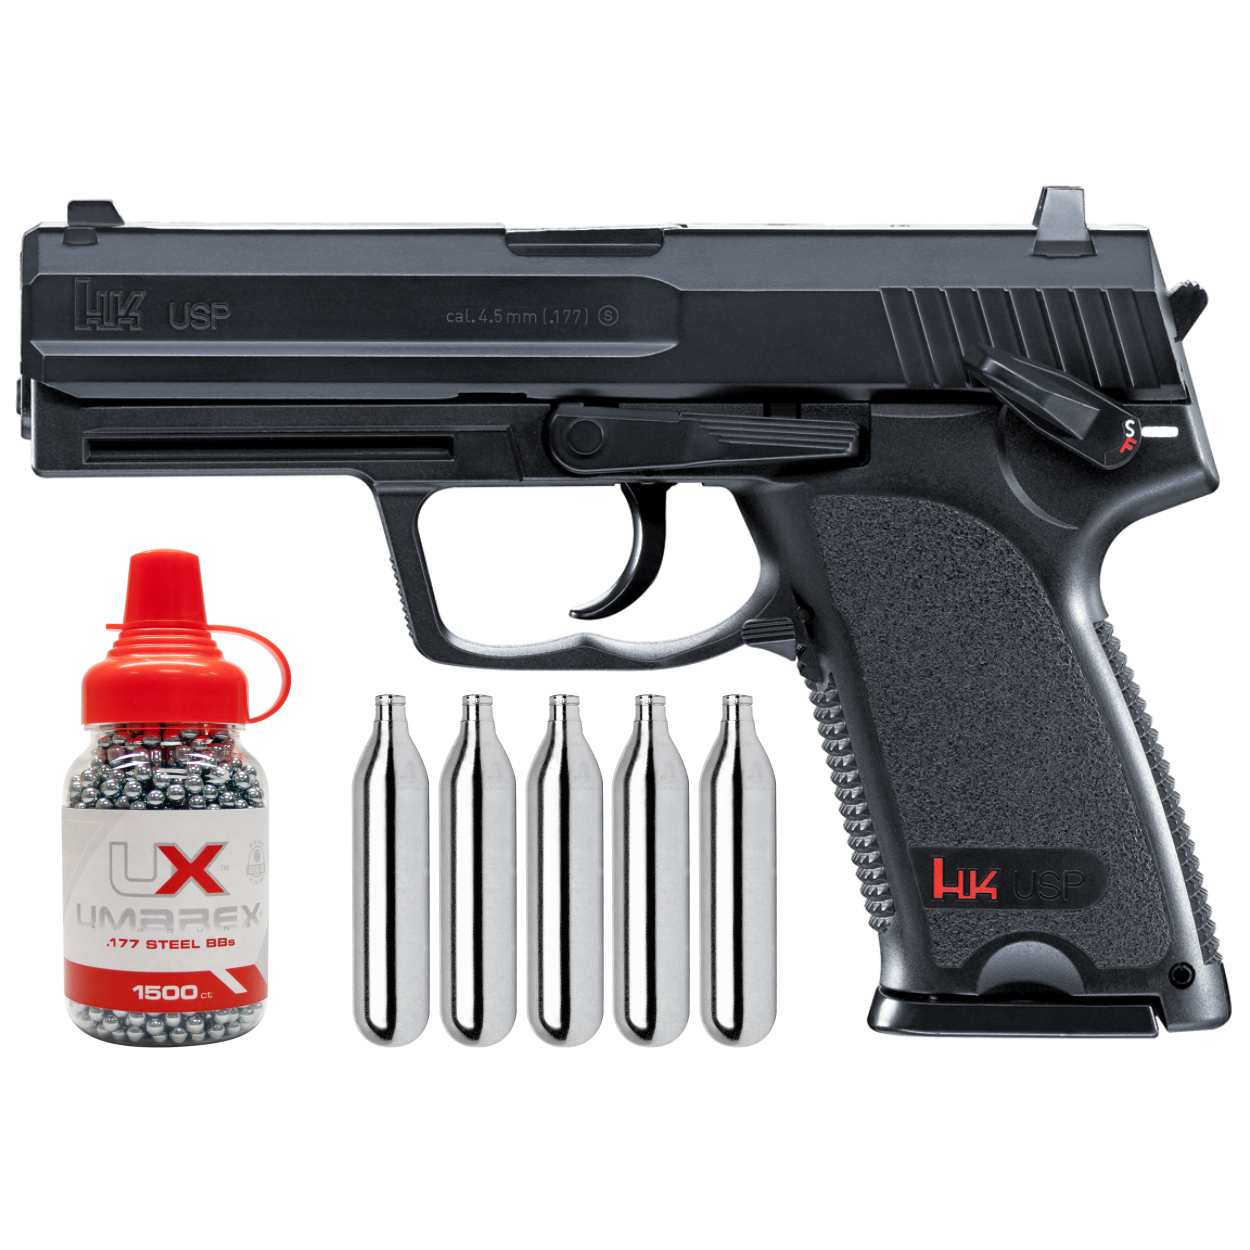 How to Load CO2 into BB Gun and Pellet Air Pistols: Umarex Airguns 